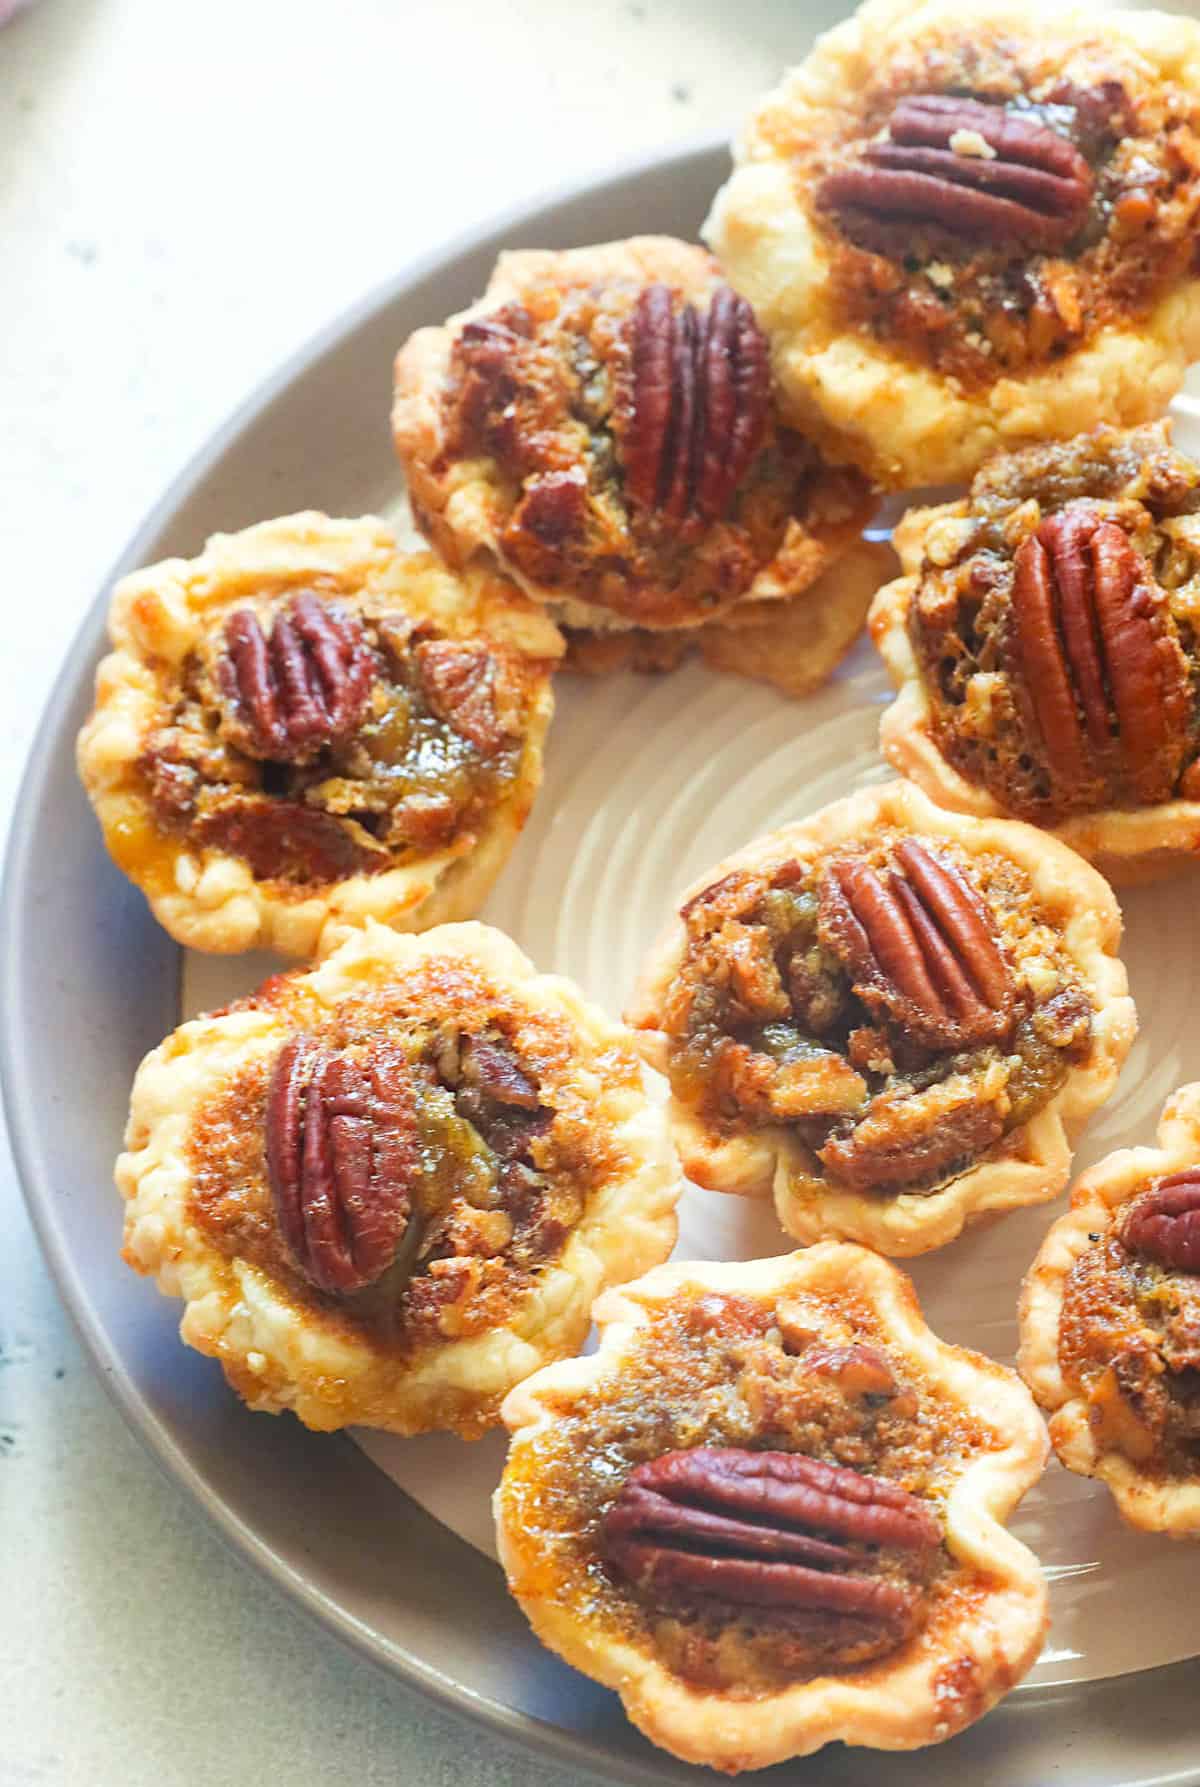 Bite into a classic Southern mini pecan pie for real comfort